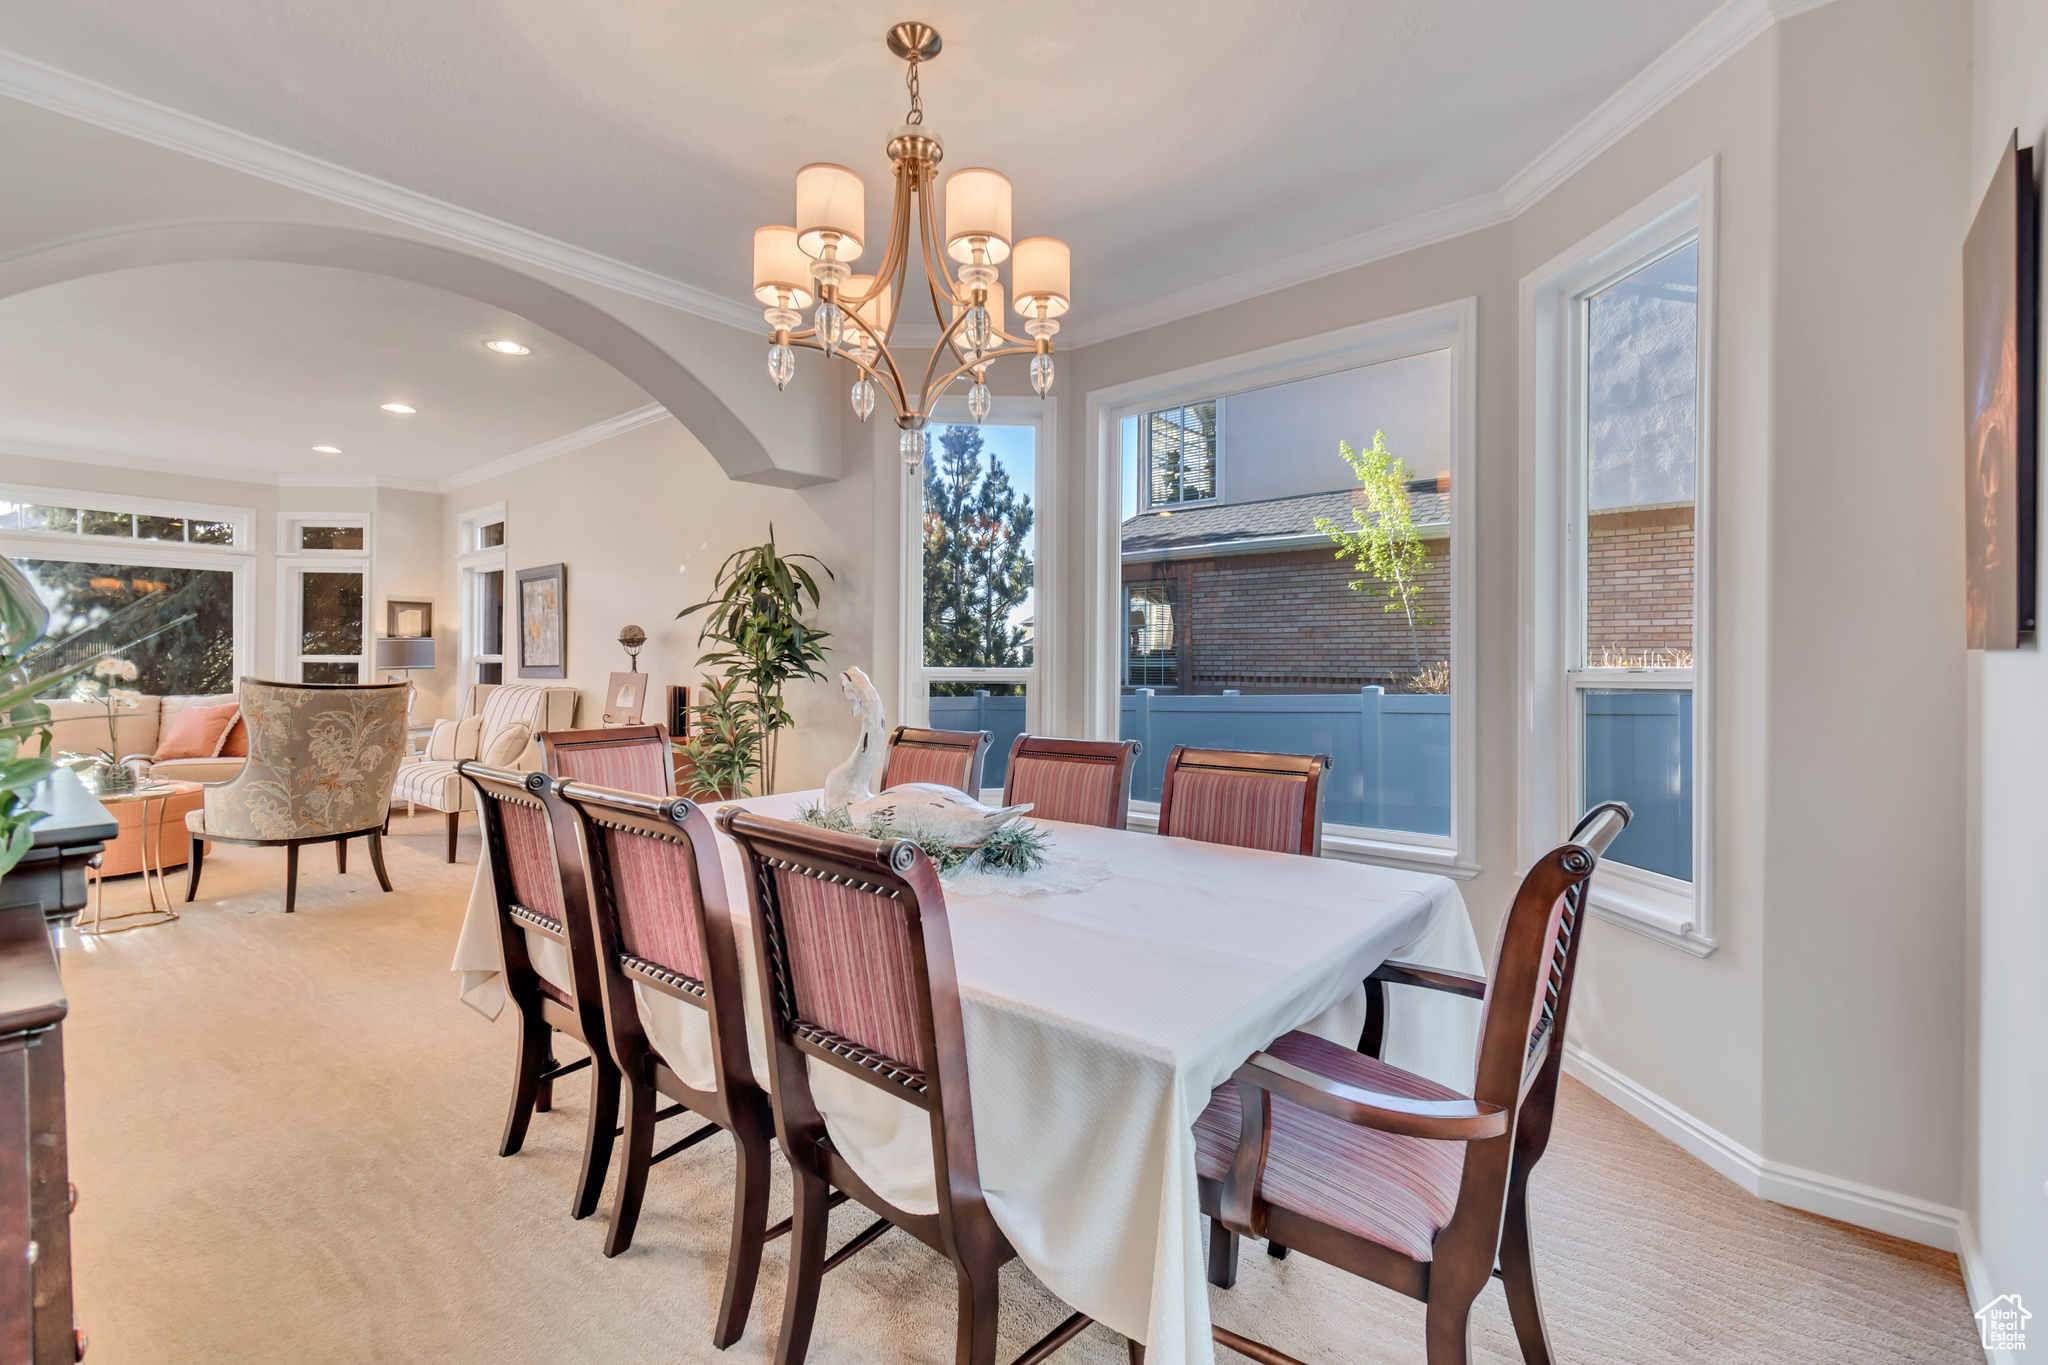 Dining area with light colored carpet, plenty of natural light, an inviting chandelier, and ornamental molding